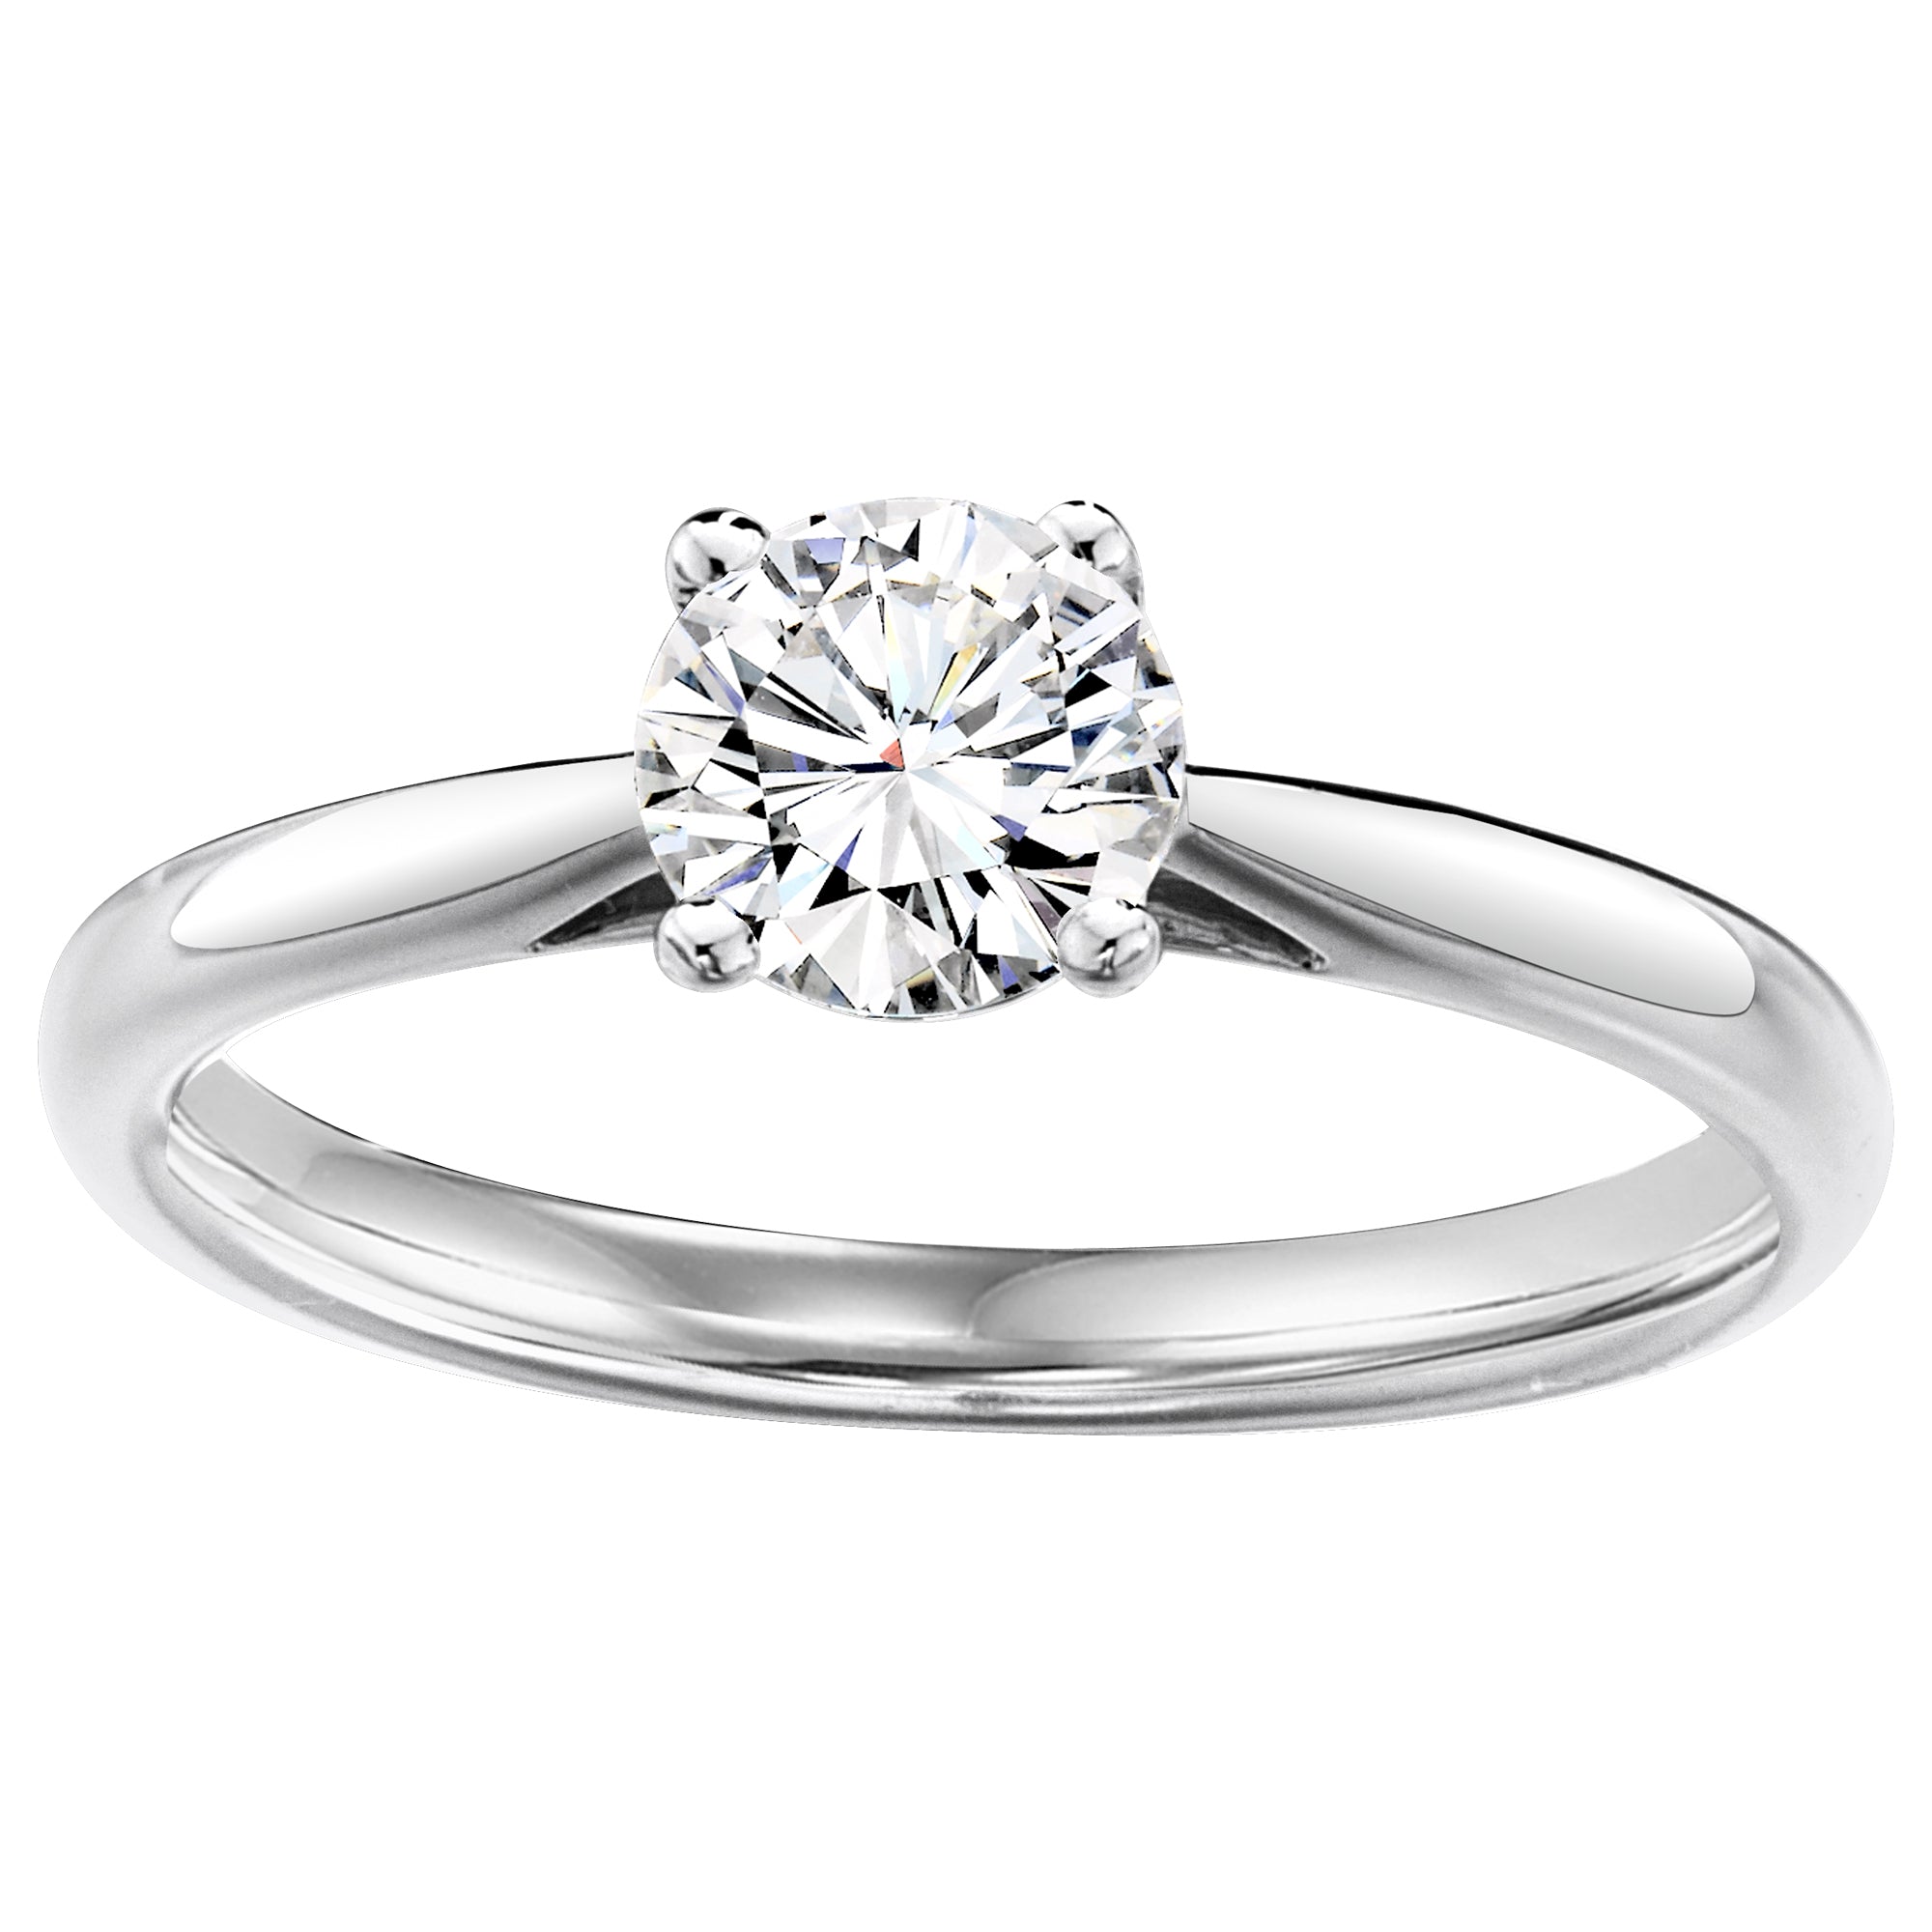 Sterling Silver Cubic Zirconia 0.70ct Ring - AK1016 - Hallmark Jewellers Formby & The Jewellers Bench Widnes